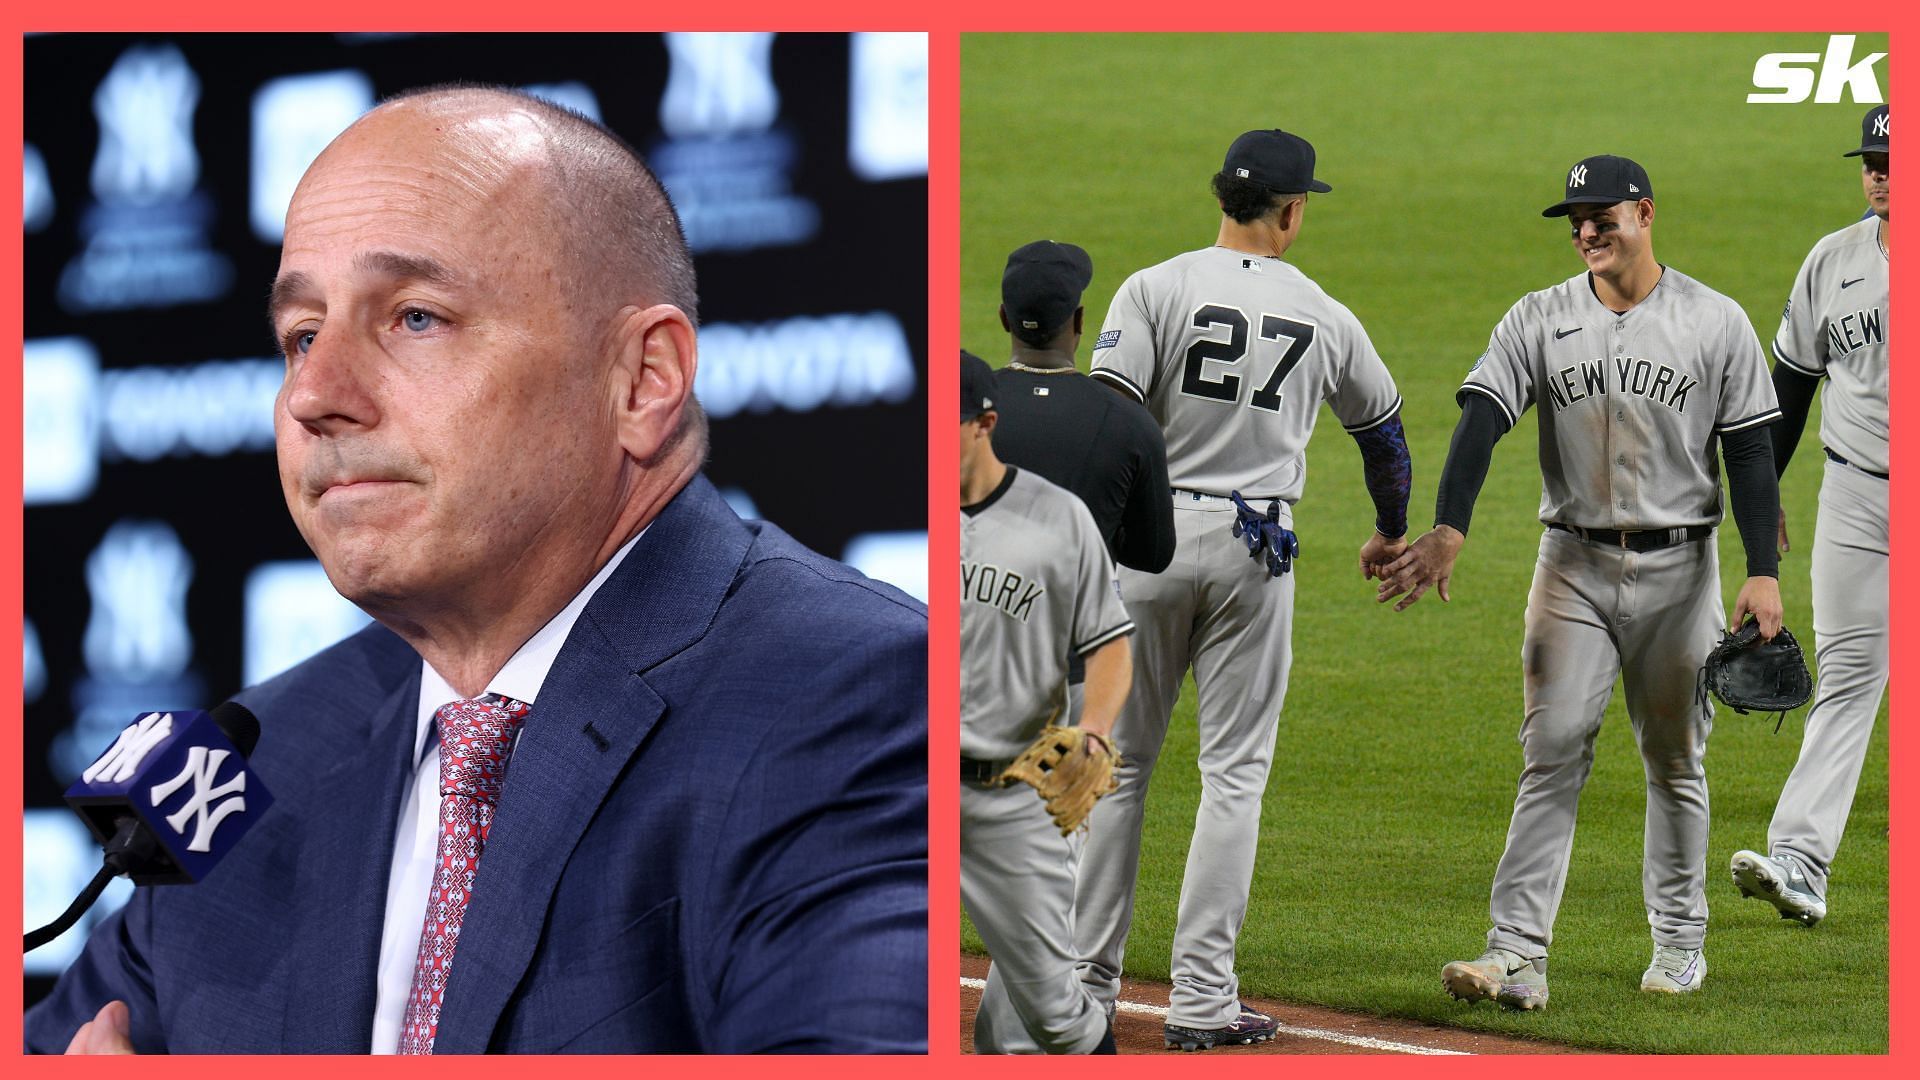 Yankees GM Brian Cashman reveals the reason behind team being quiet during the trade deadline